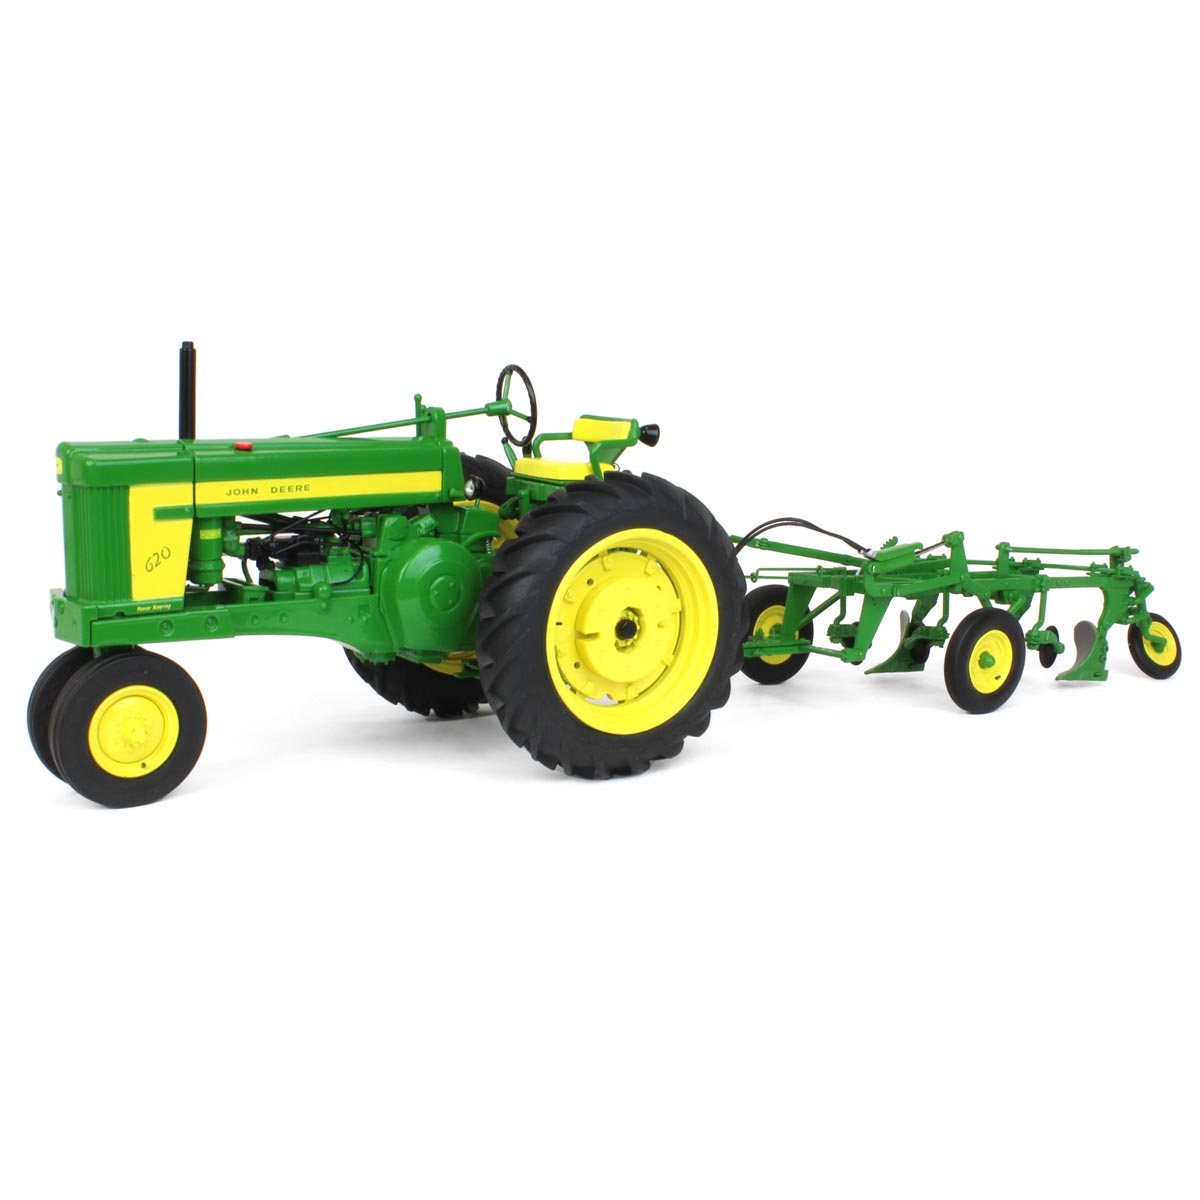 John Deere 620 Narrow Front with 555 Plough Precision Series - 1:16